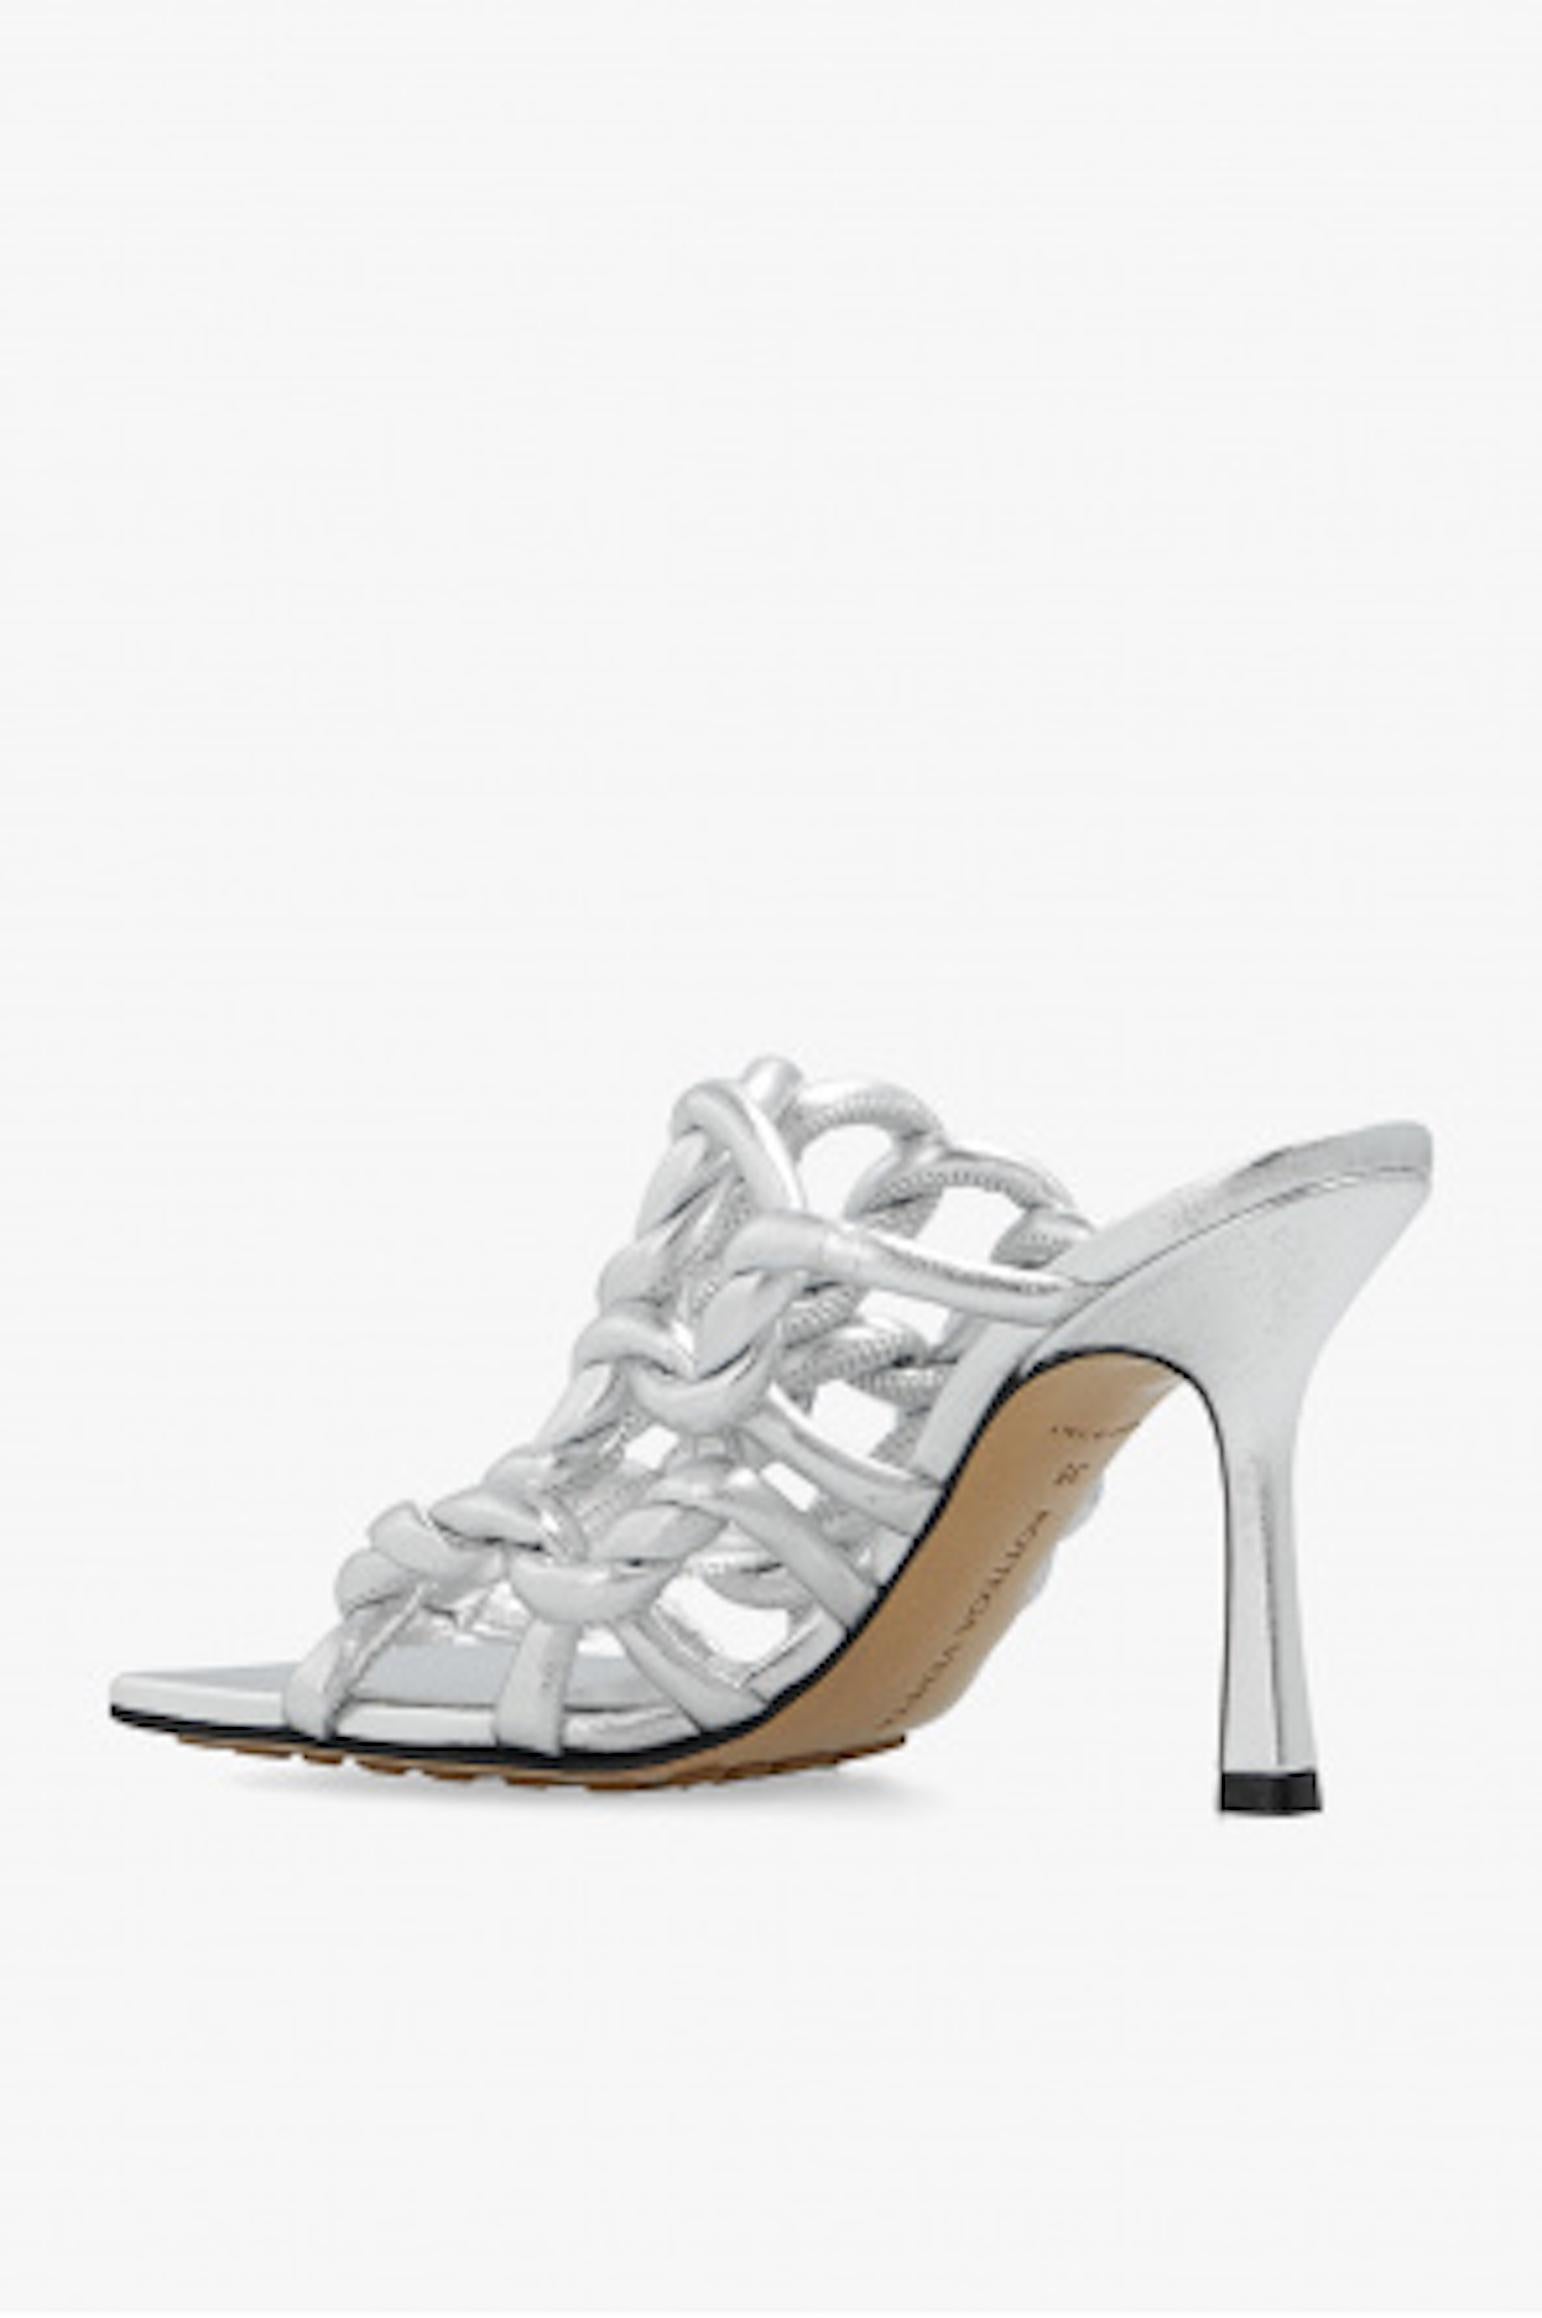 Botteg Veneta Stretch Heeled Sandal in Silver Sz 37 In New Condition For Sale In Paradise Island, BS